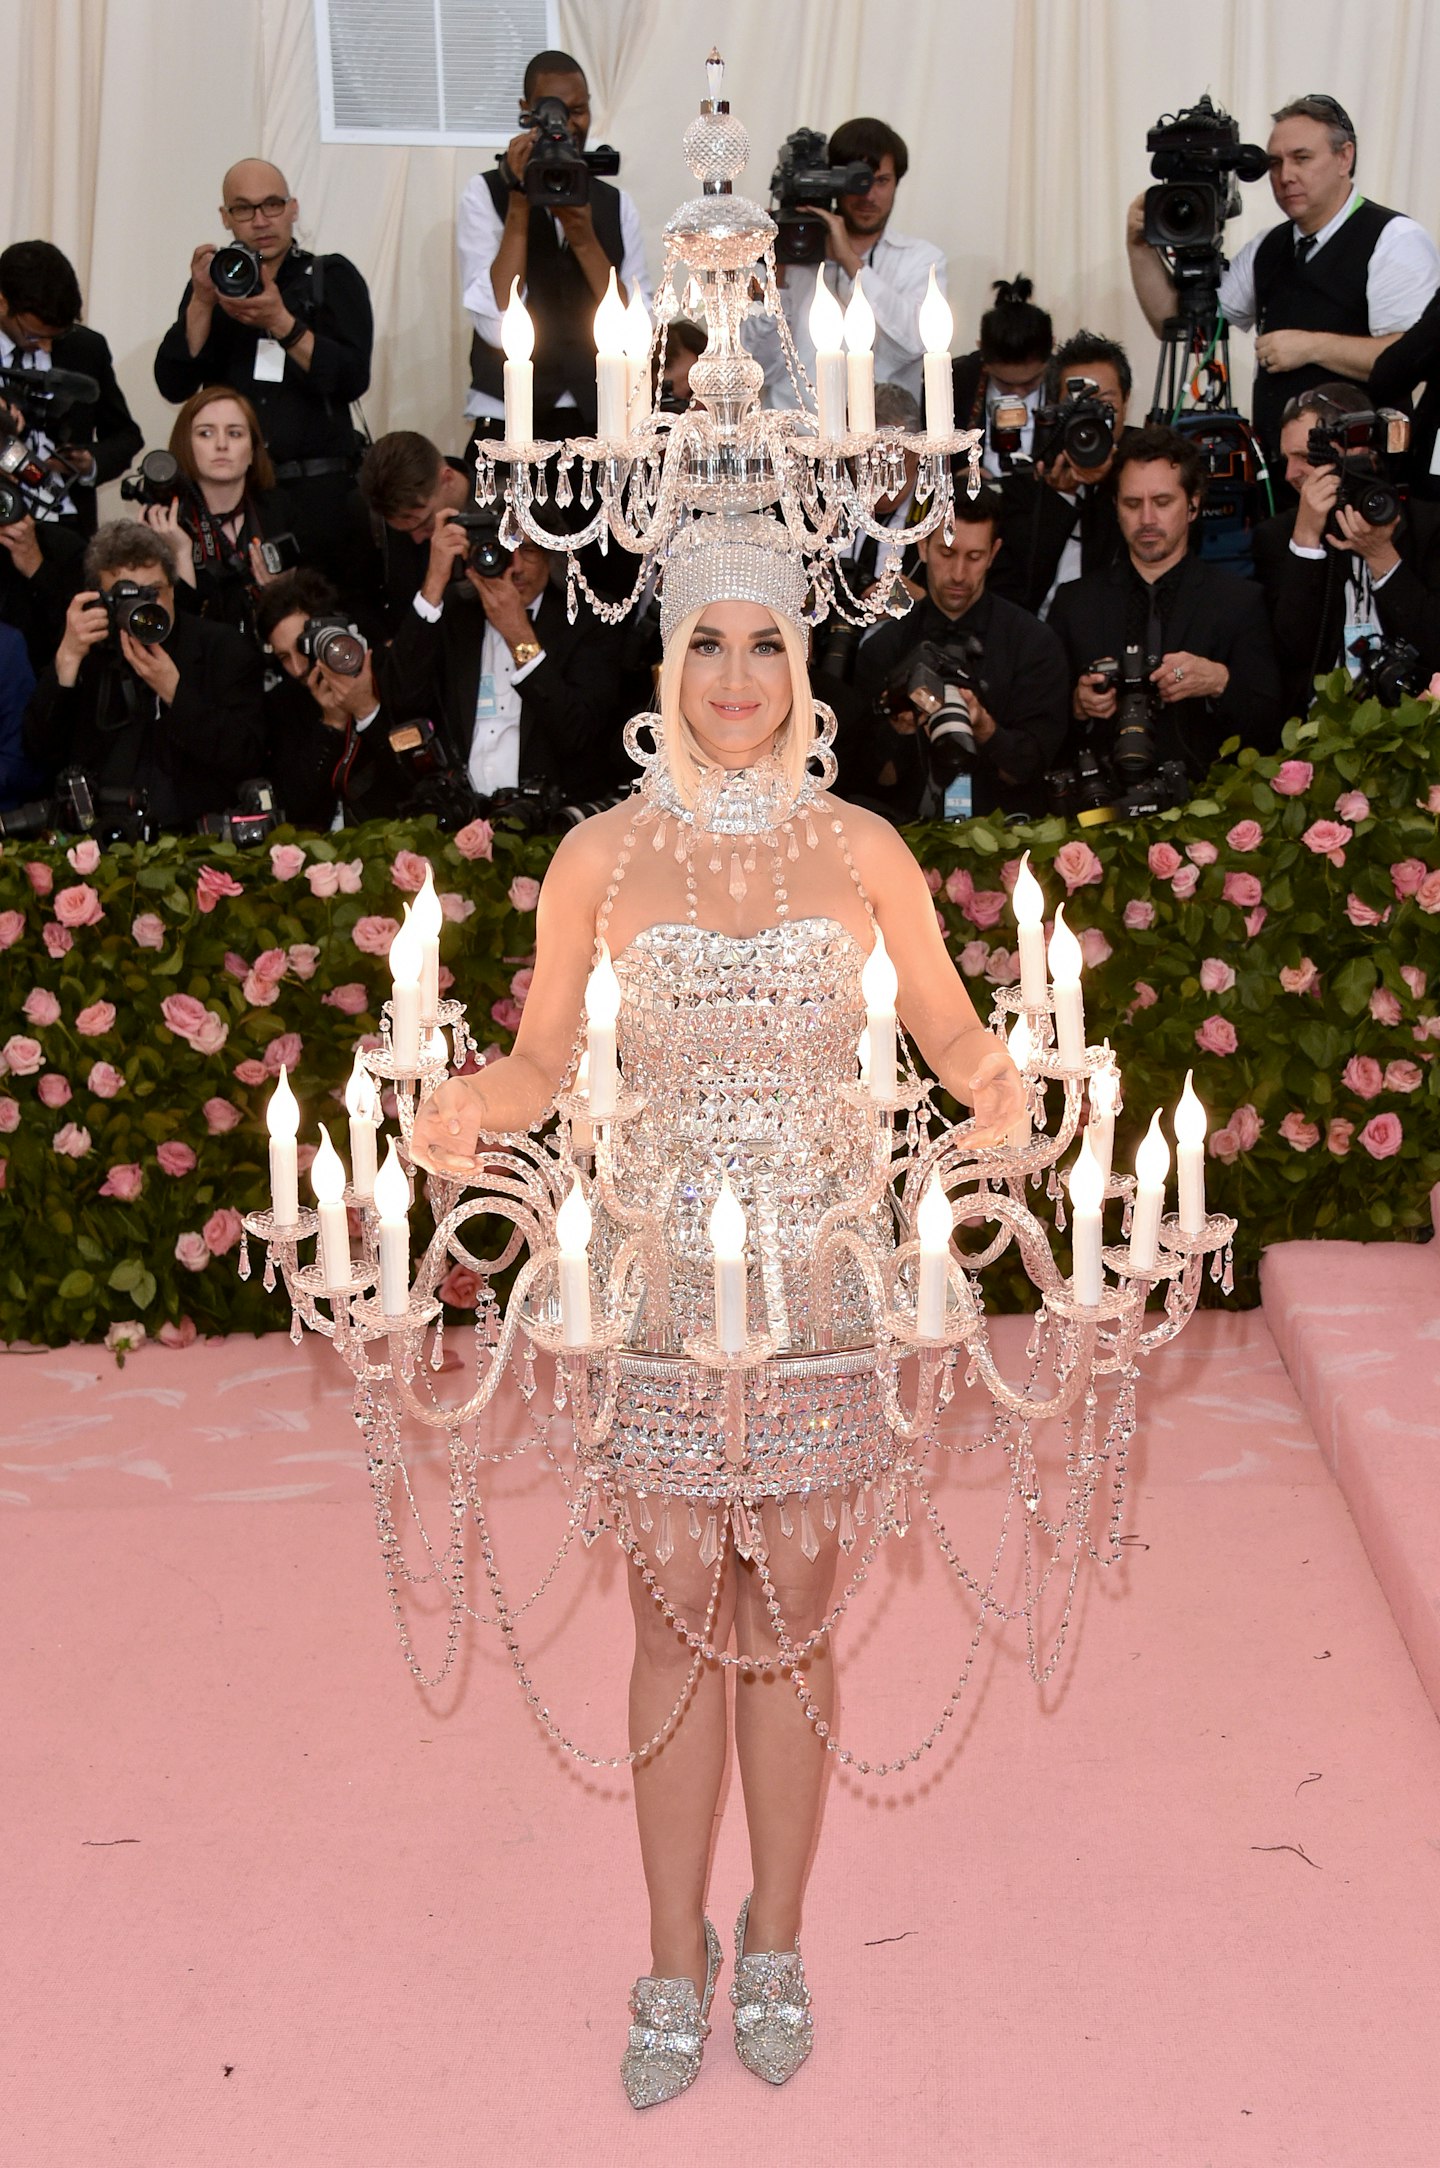 Katy Perry in an amazing Moschino look